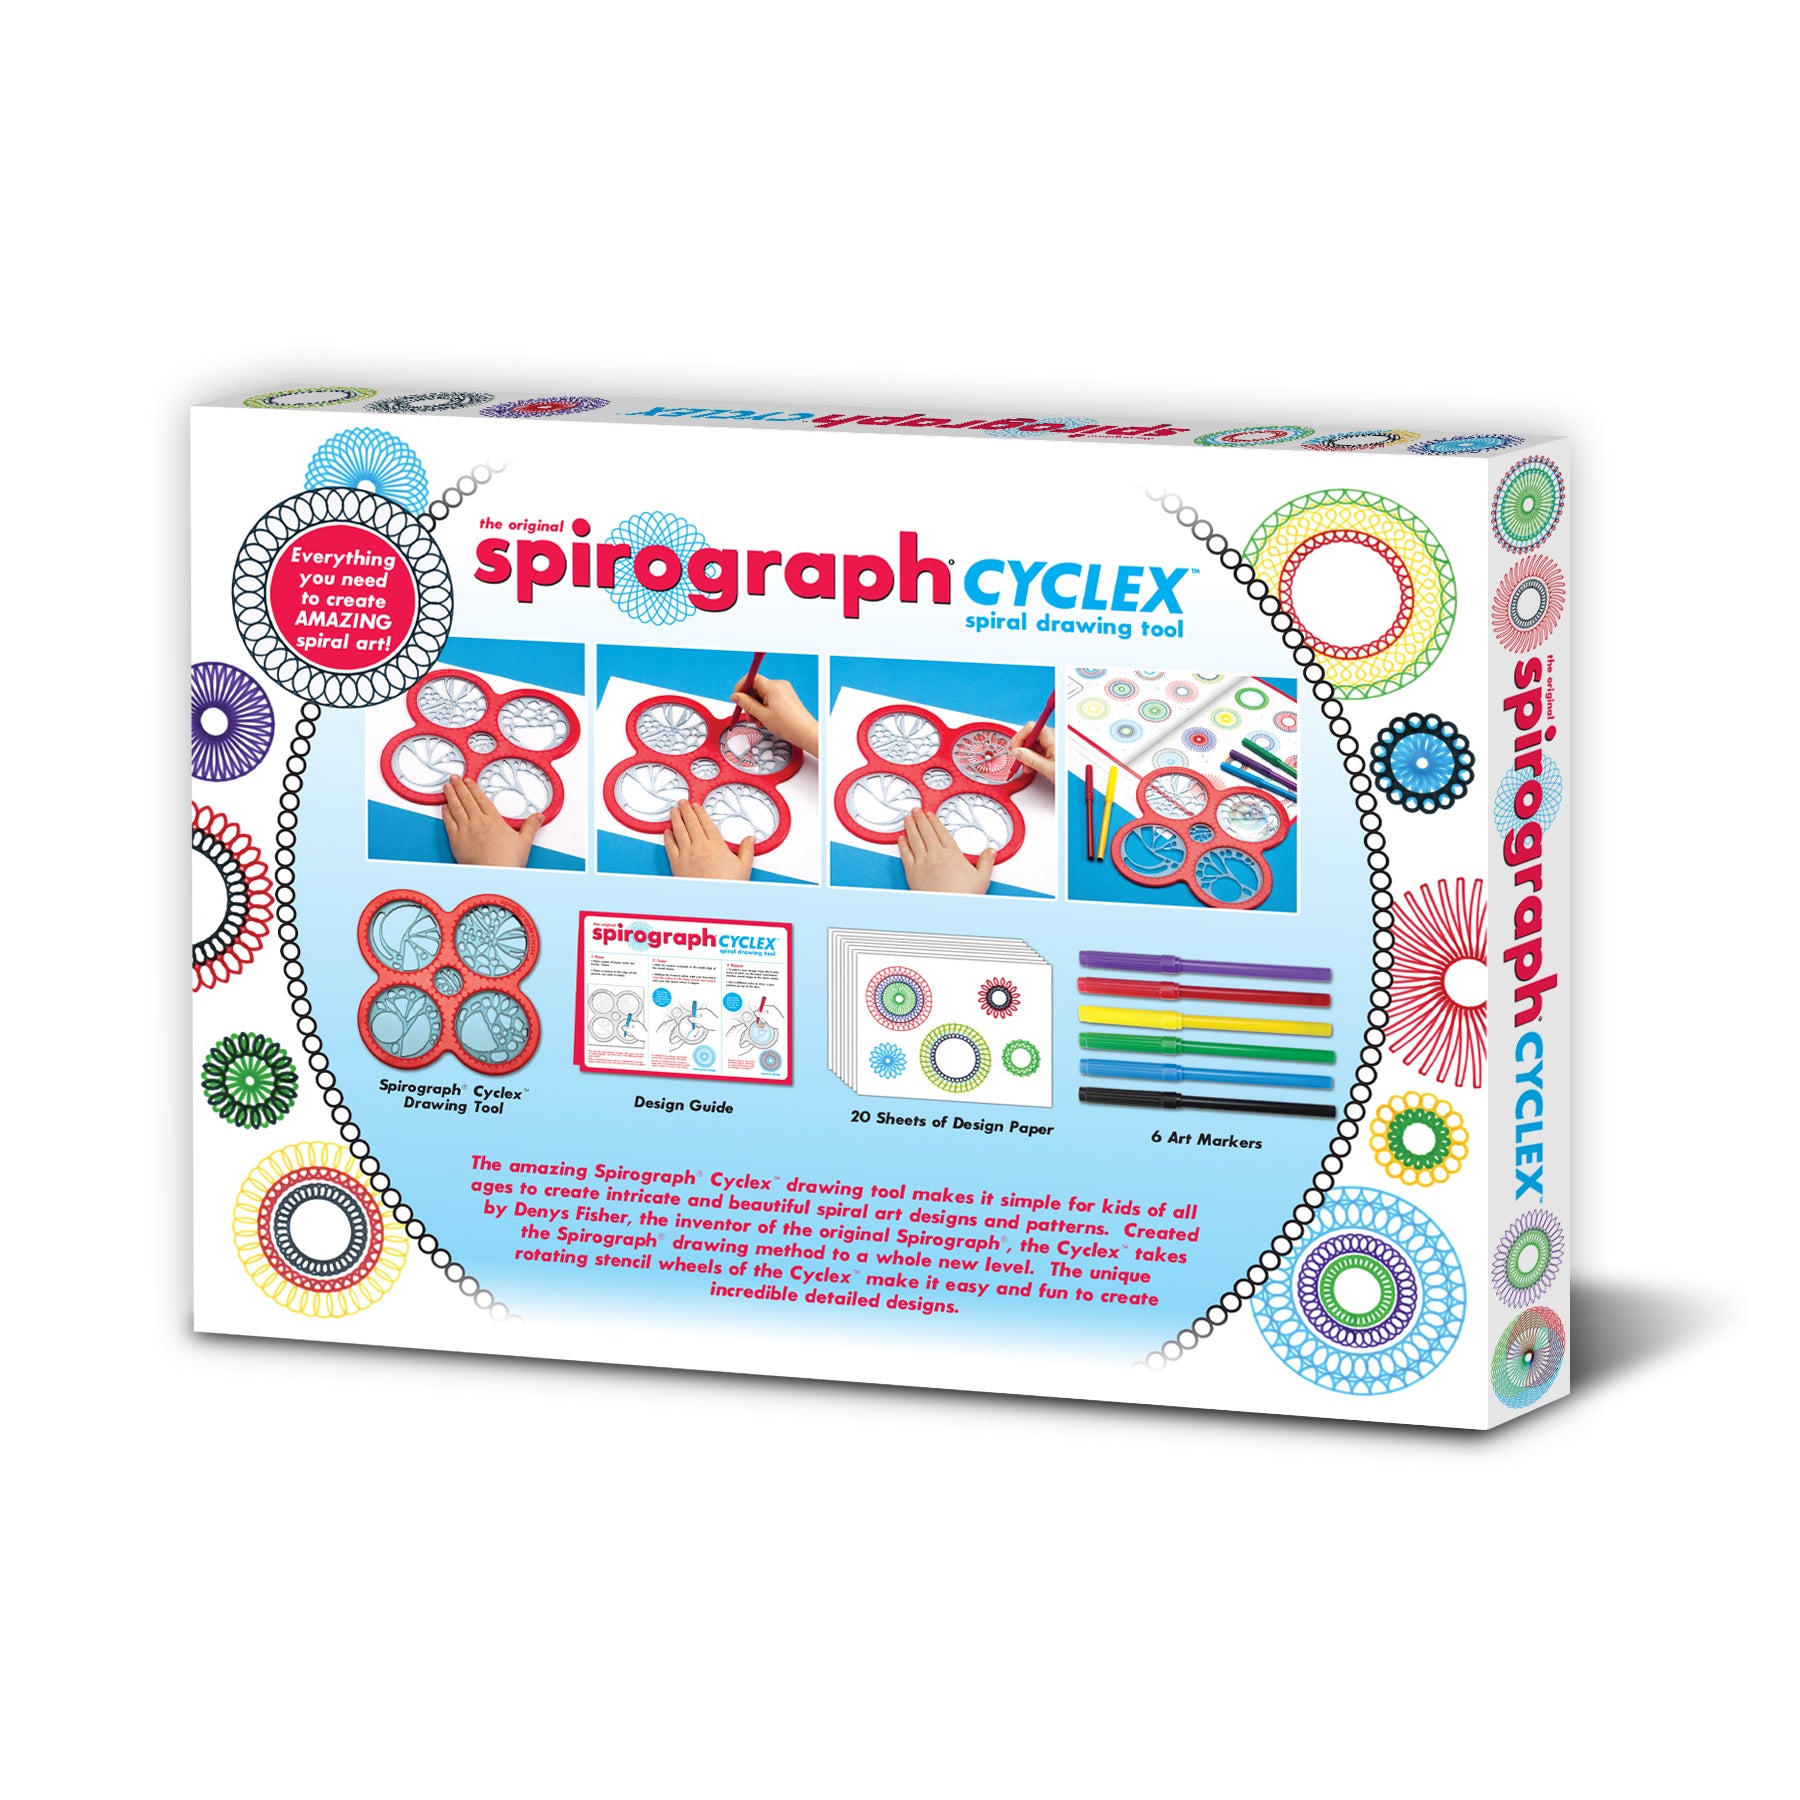 All it took was a Spirograph to make my day